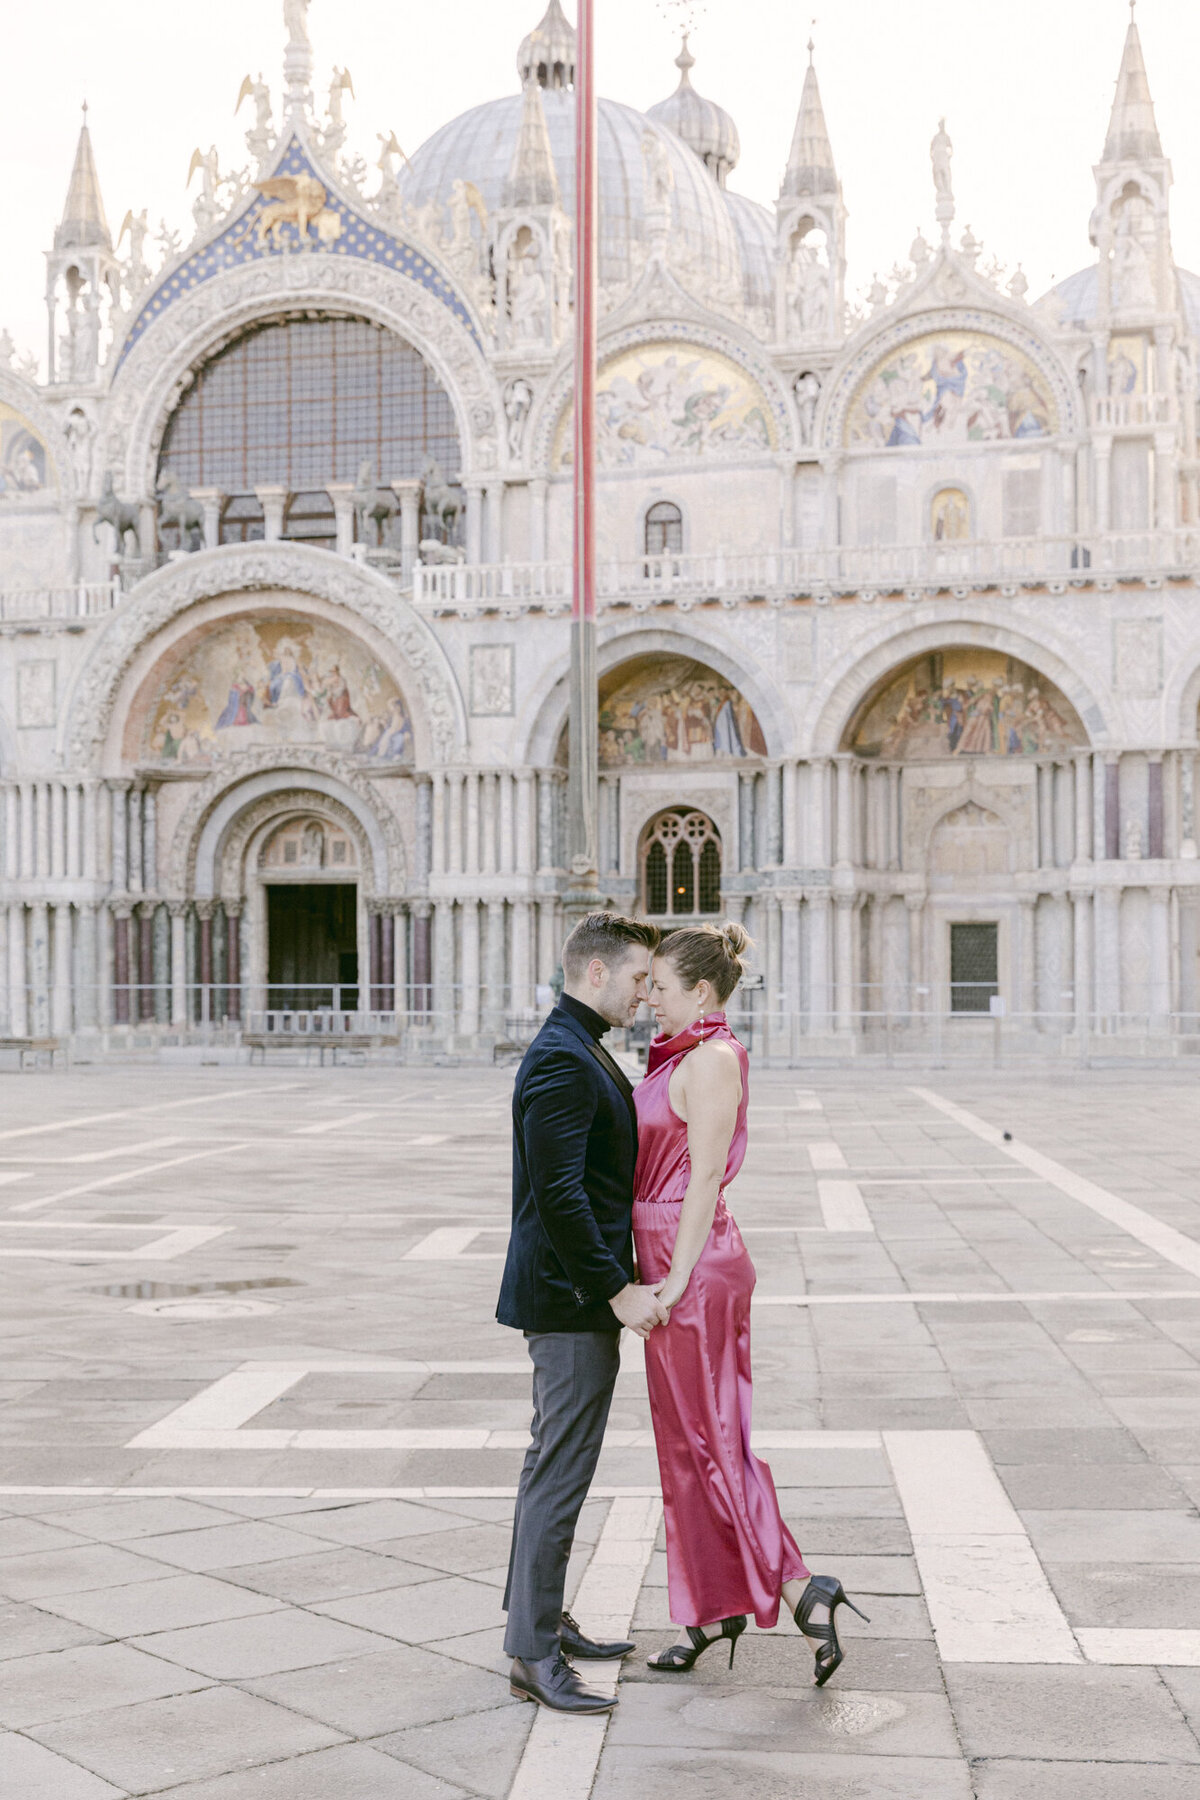 PERRUCCIPHOTO_VENICE_ITALY_ENGAGEMENT_5